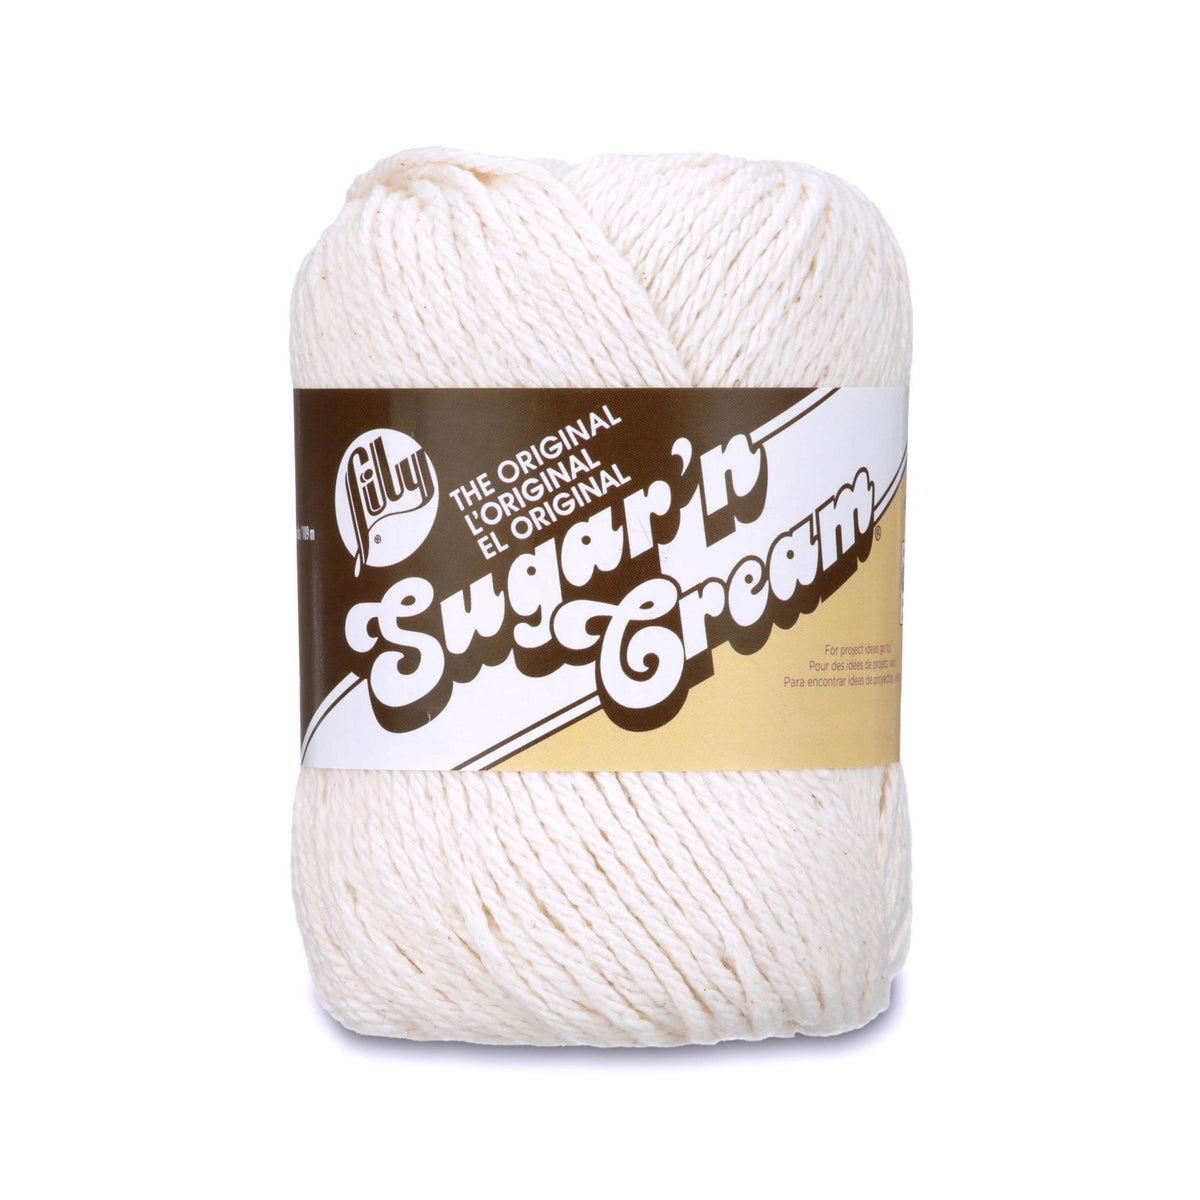 Lily Sugar 'n Cream Ombre - Knitty City